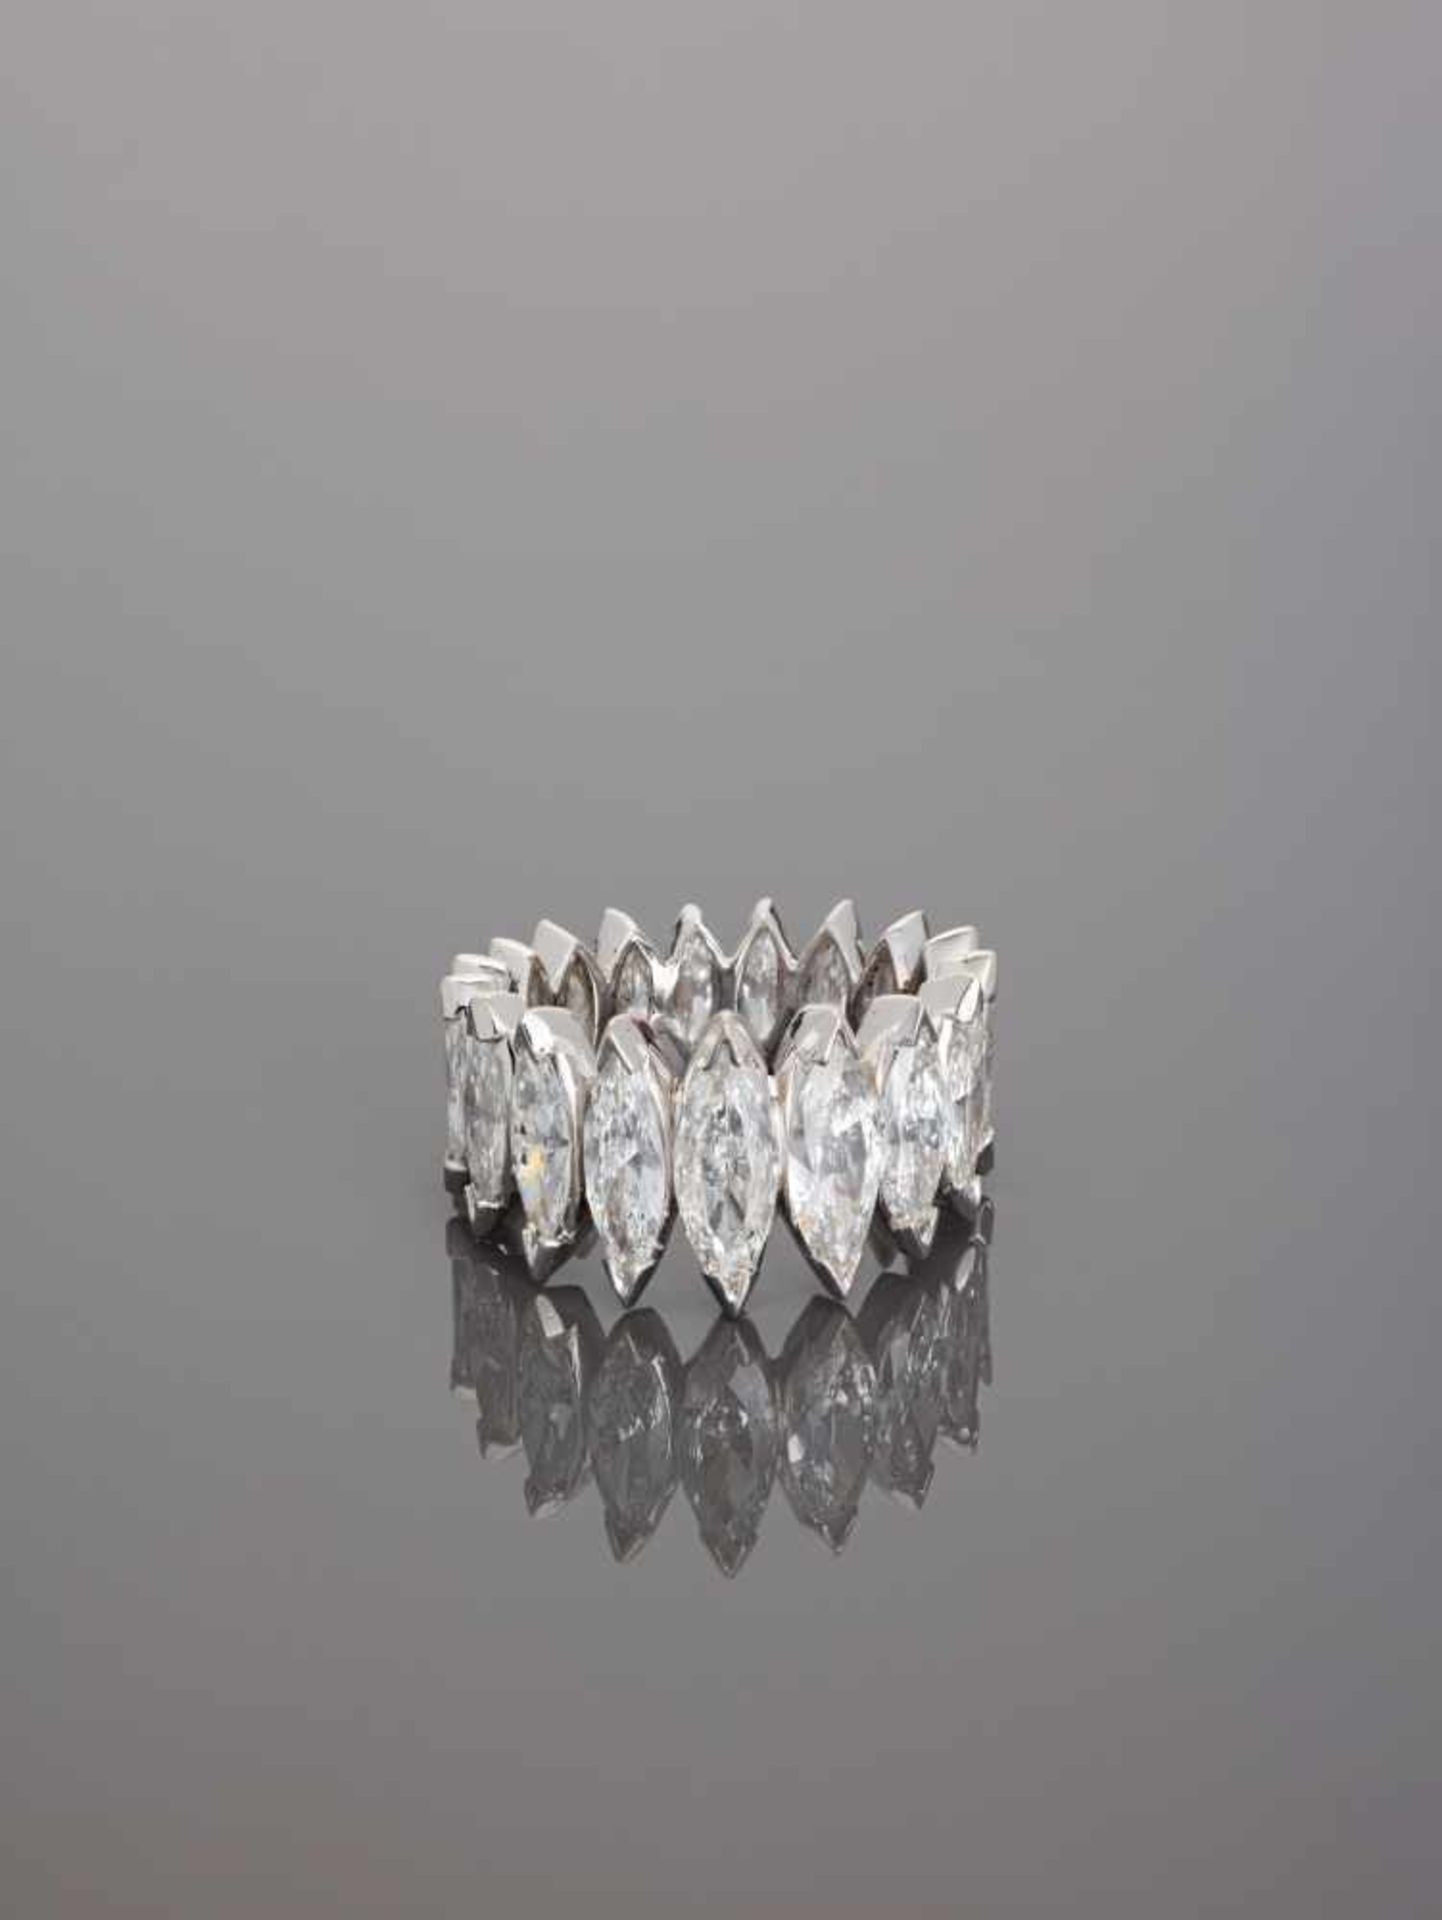 AN ‘ETERNITY BAND’ PLATINUM RING WITH 10.2 CARAT OF MARQUISE CUT DIAMONDSAfter 1980, unmarked950